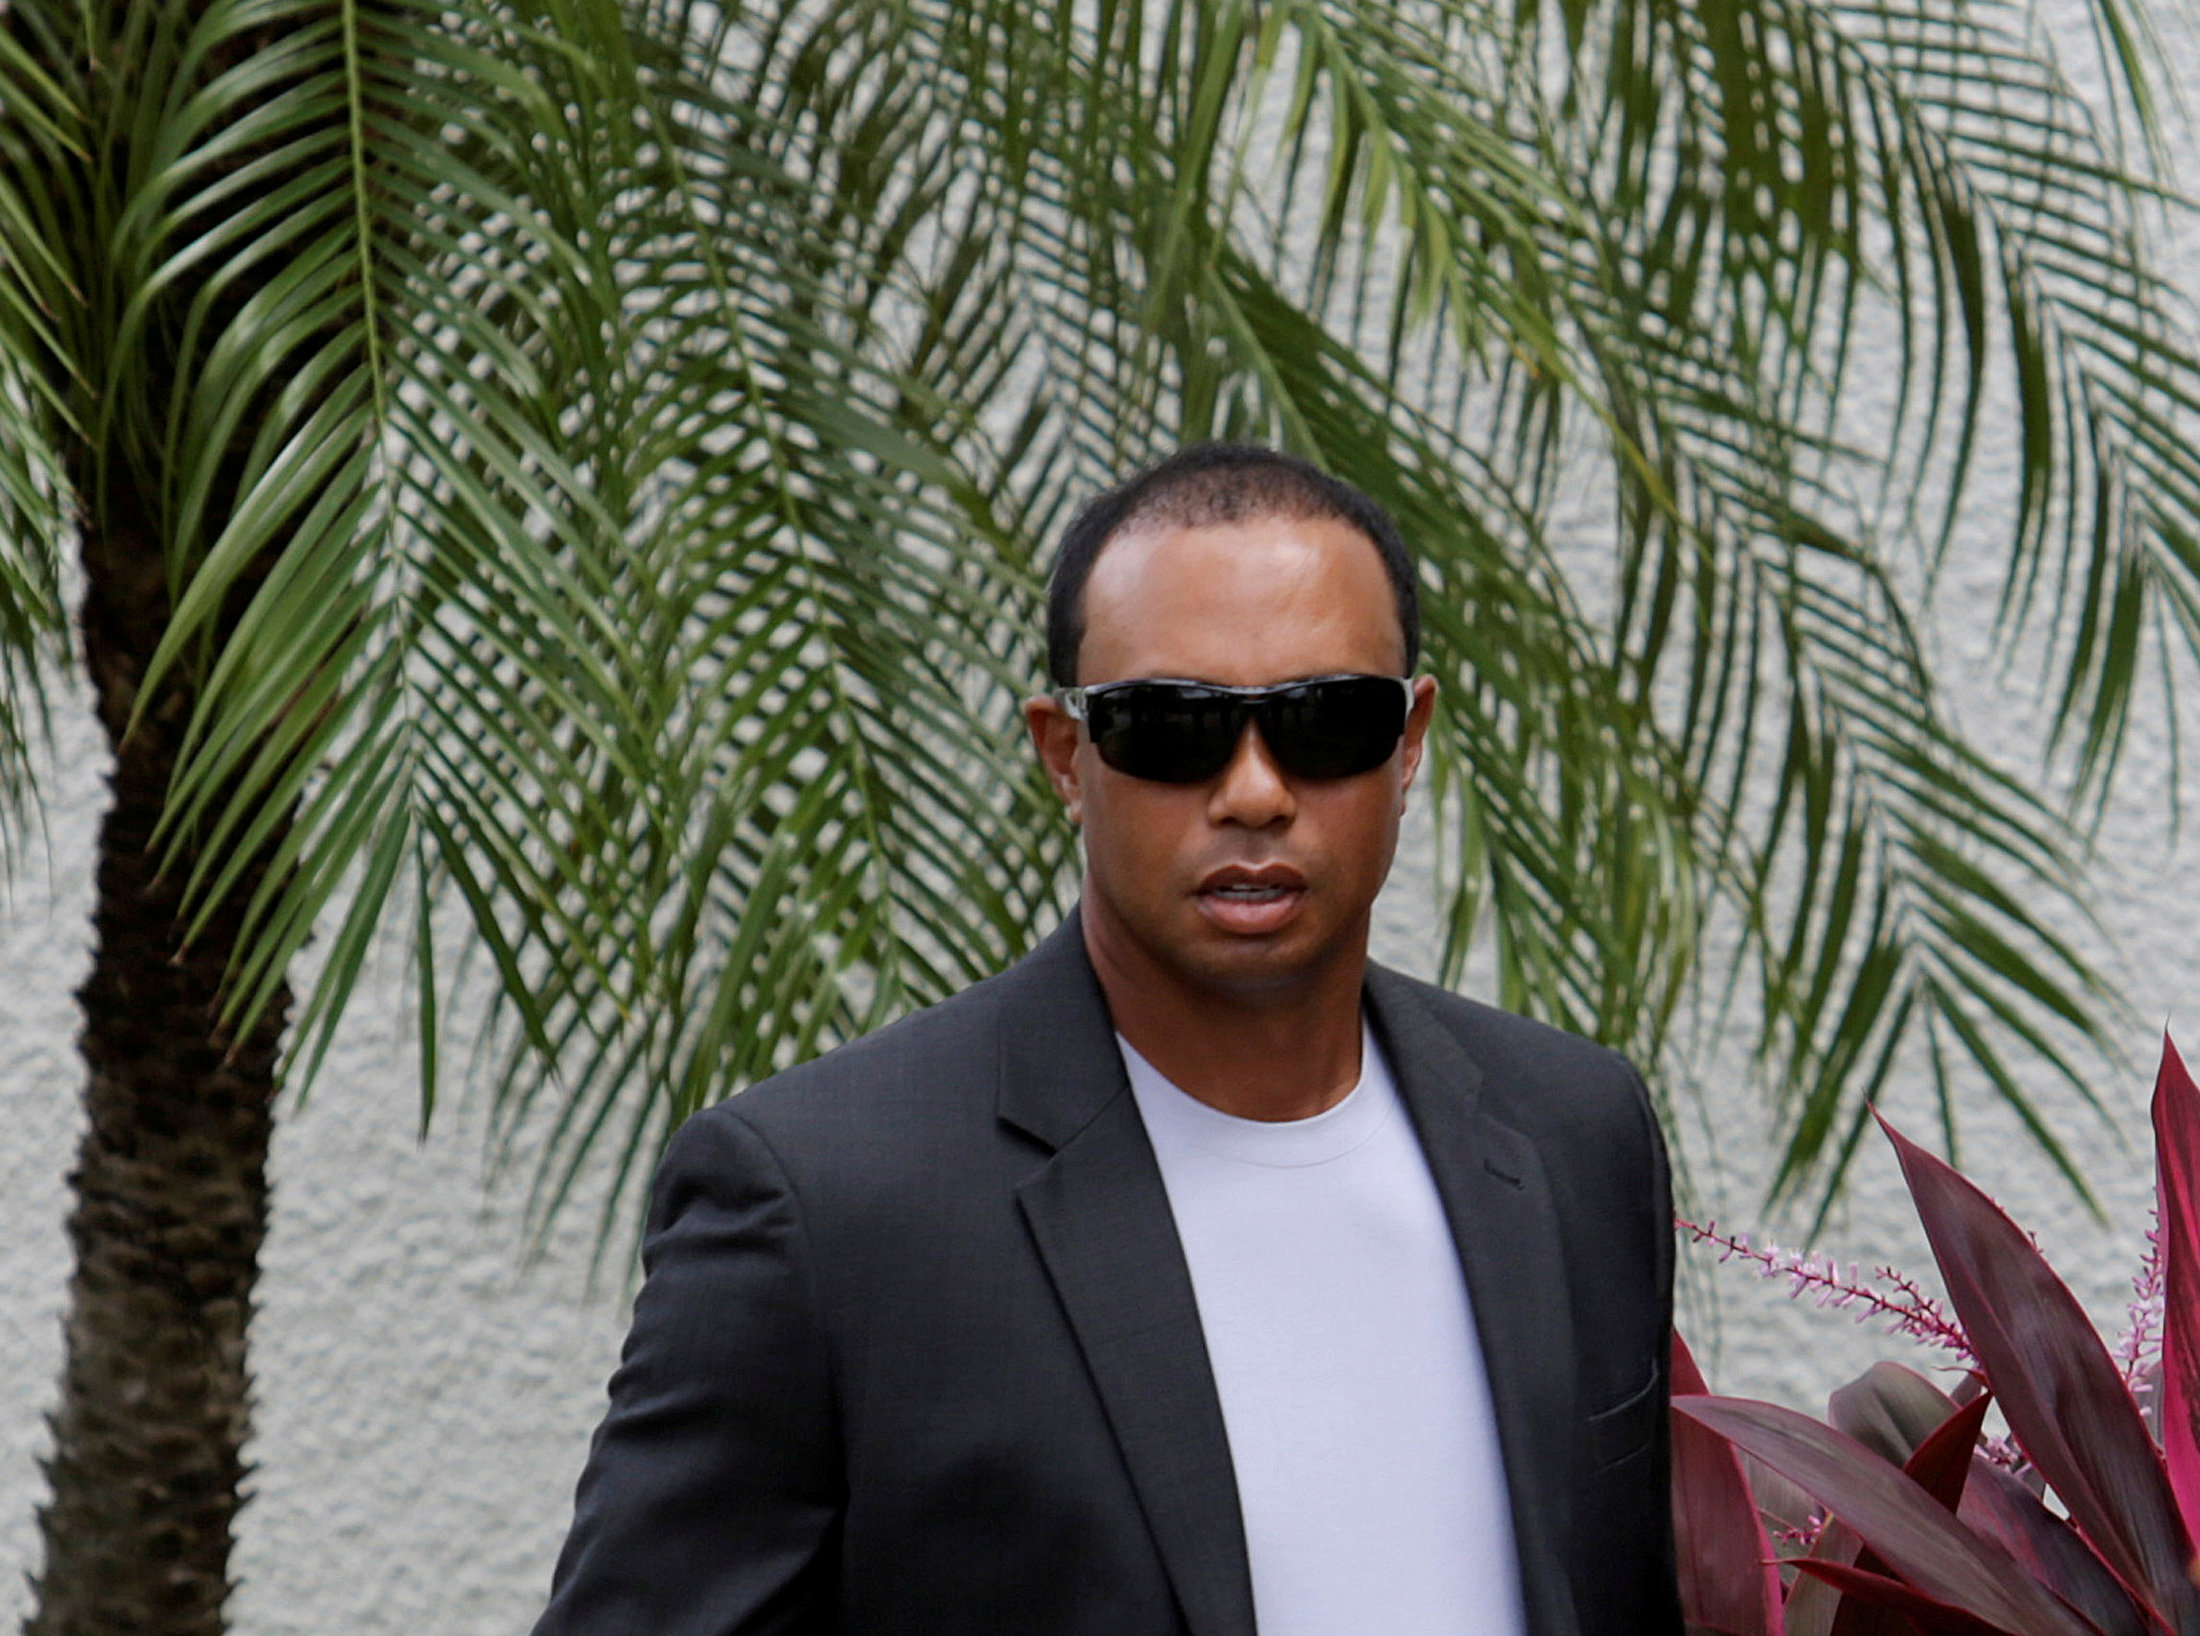 Golf: Tiger Woods set to return in Bahamas next month